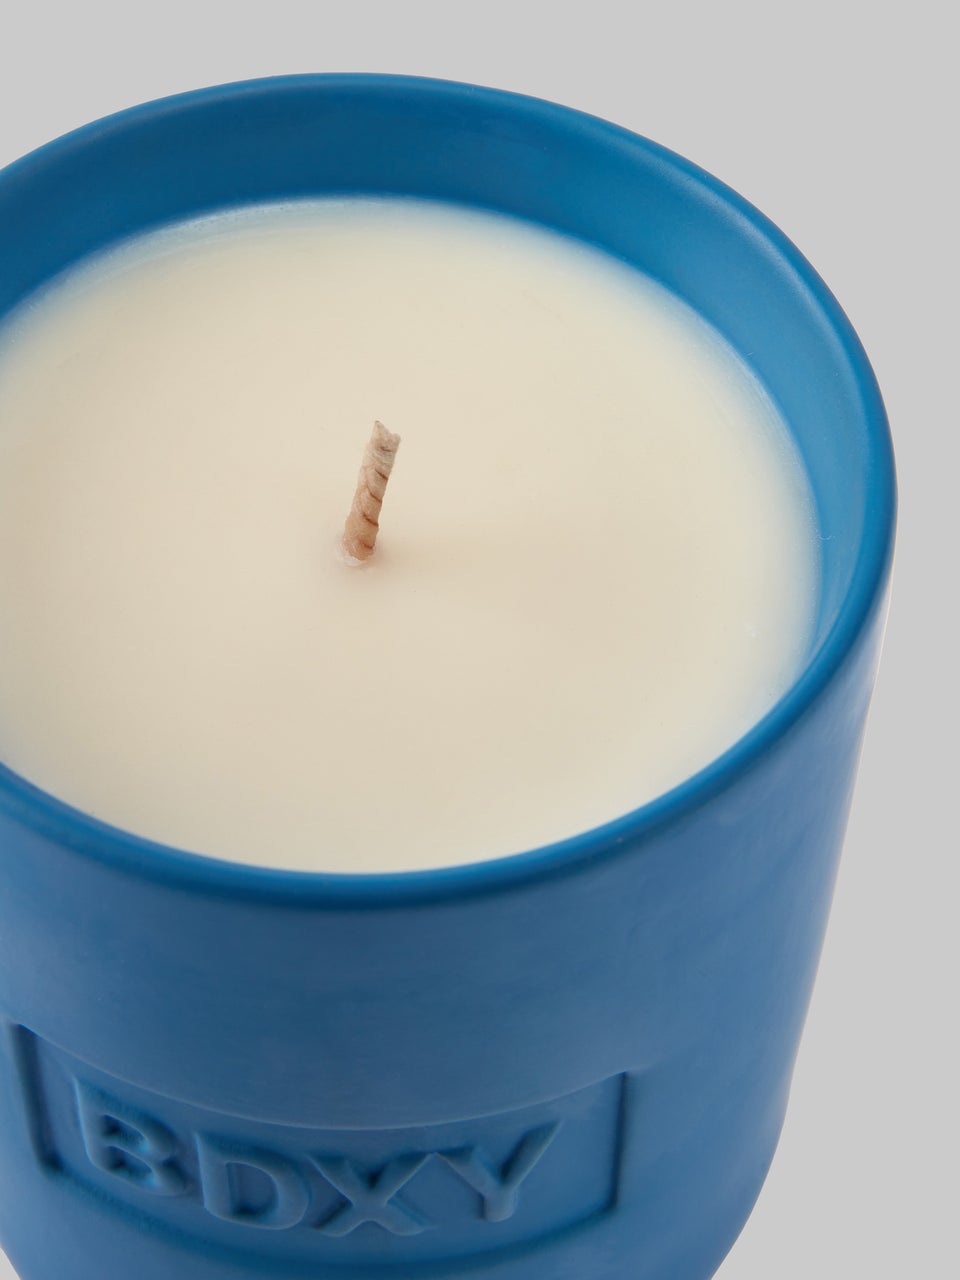 Salinas Scented Candle 320g